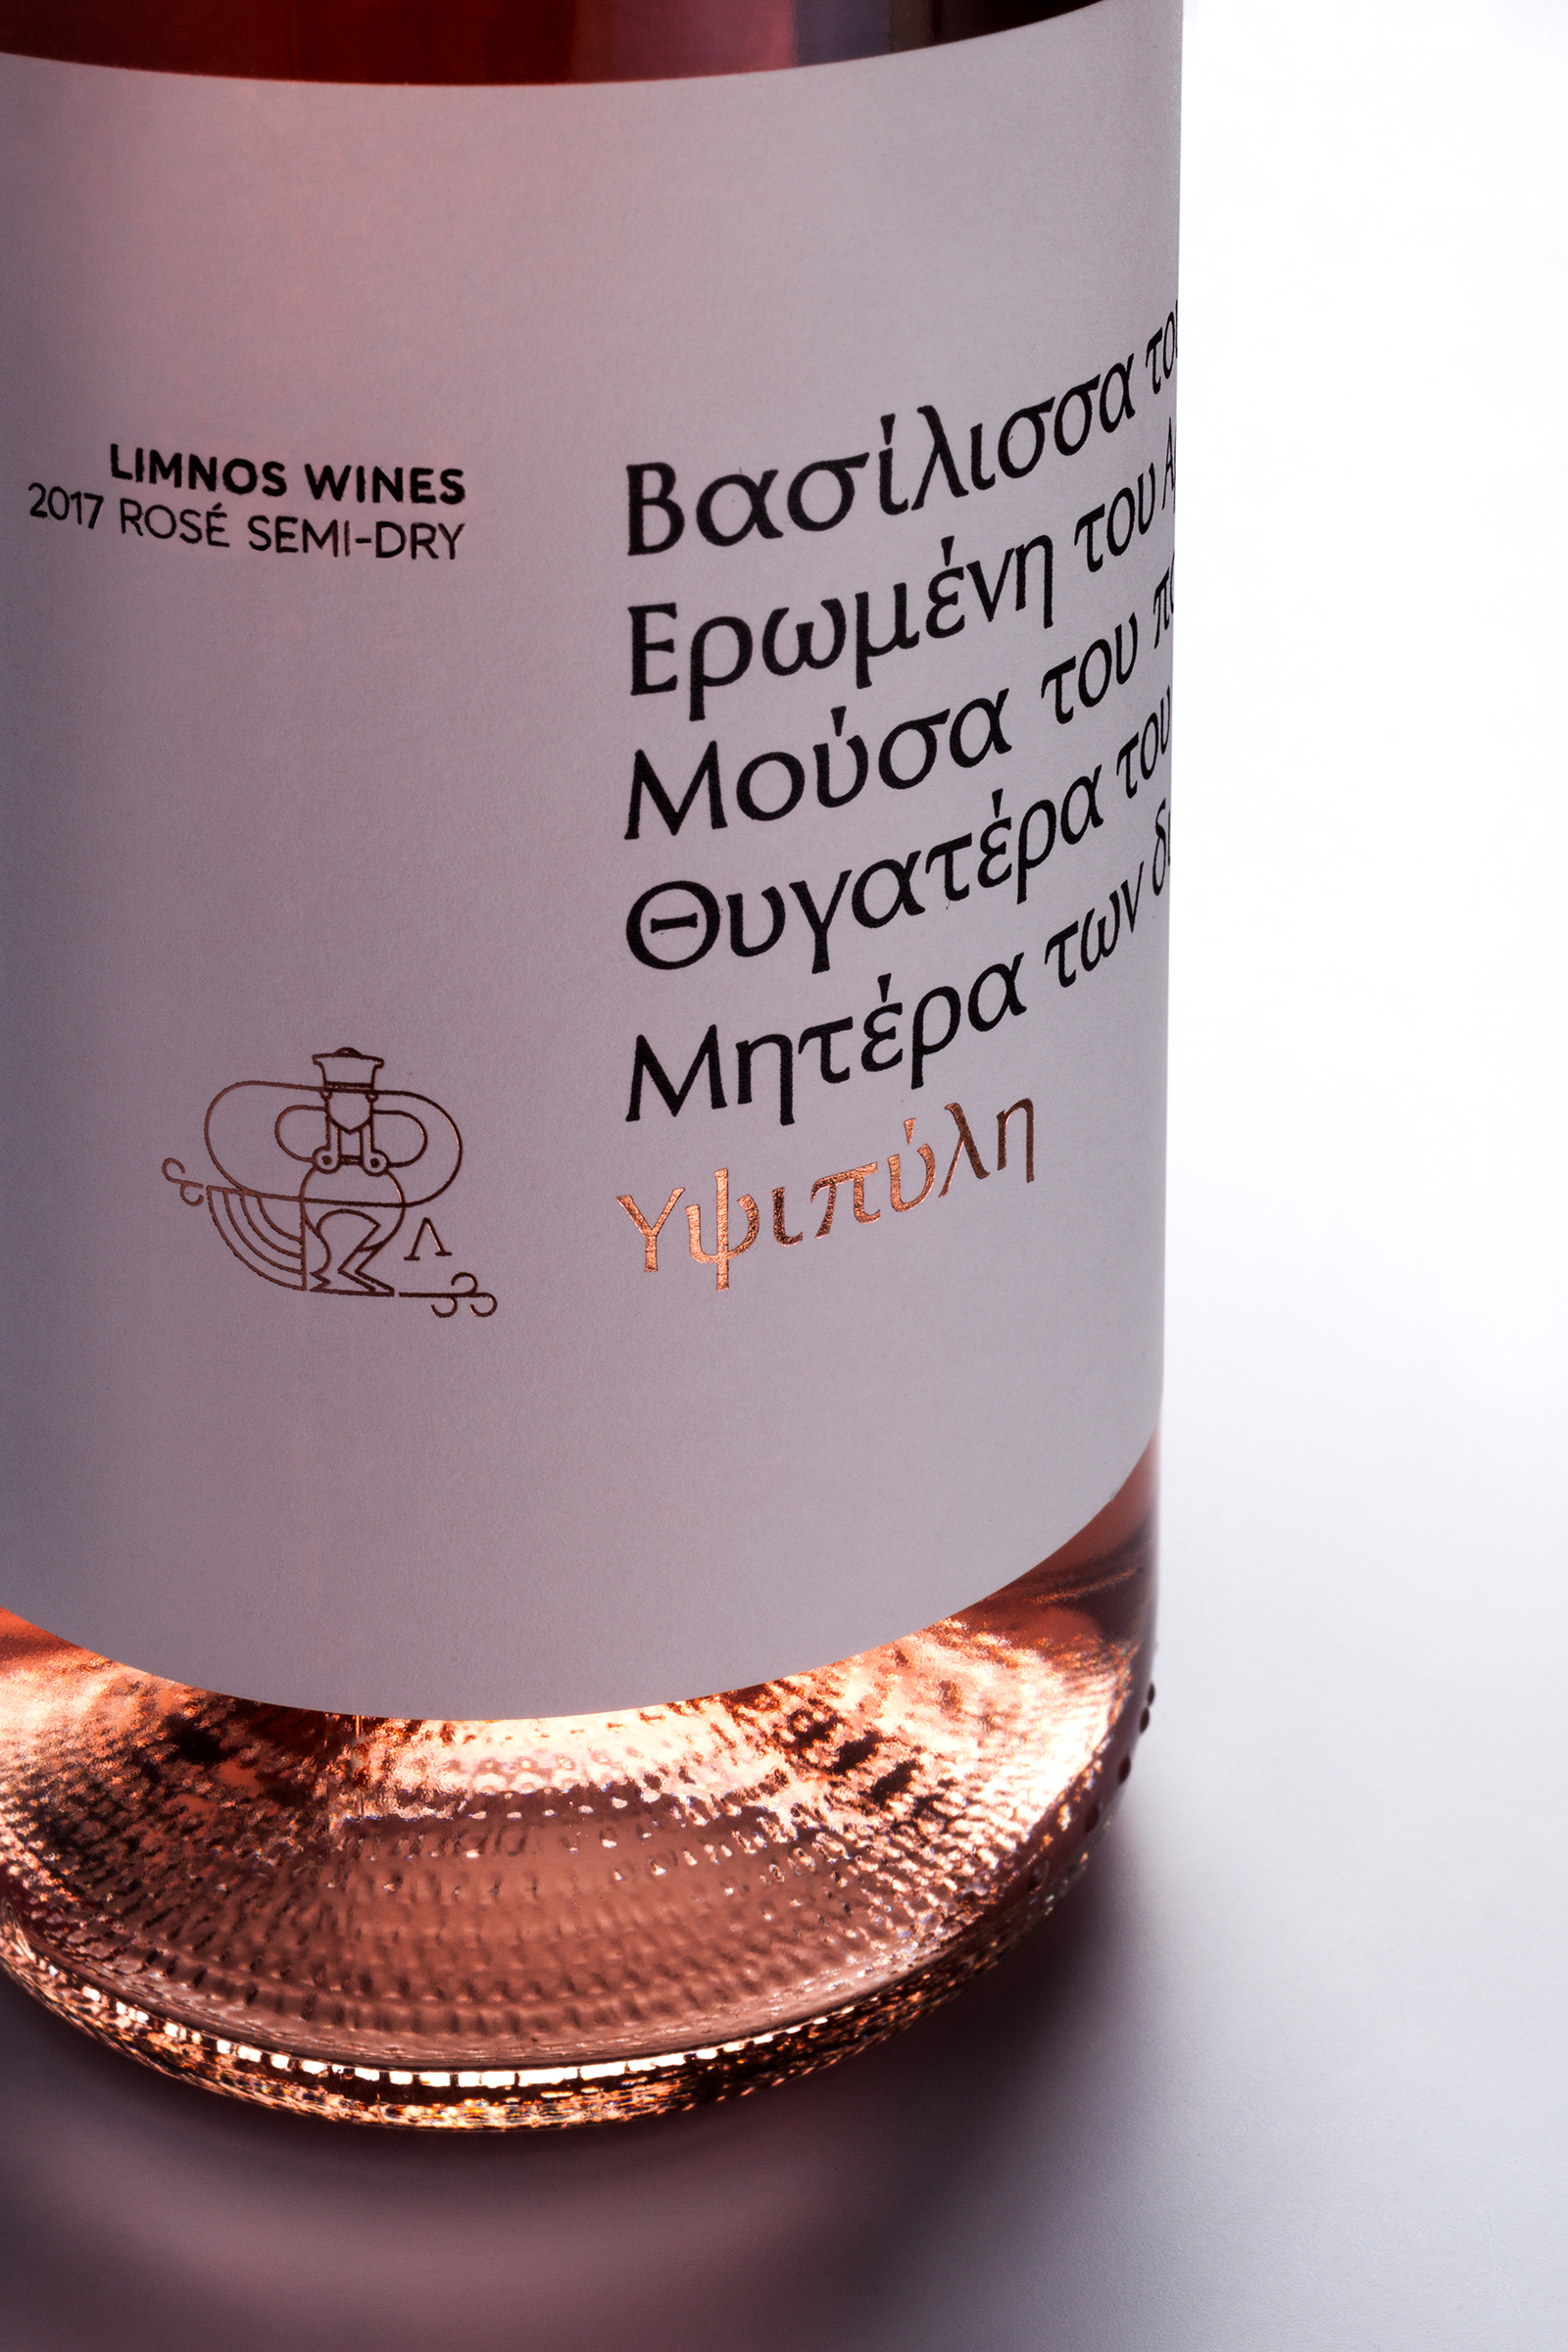 Naming and Label Design for the Rose Wine for an Agricultural Cooperative